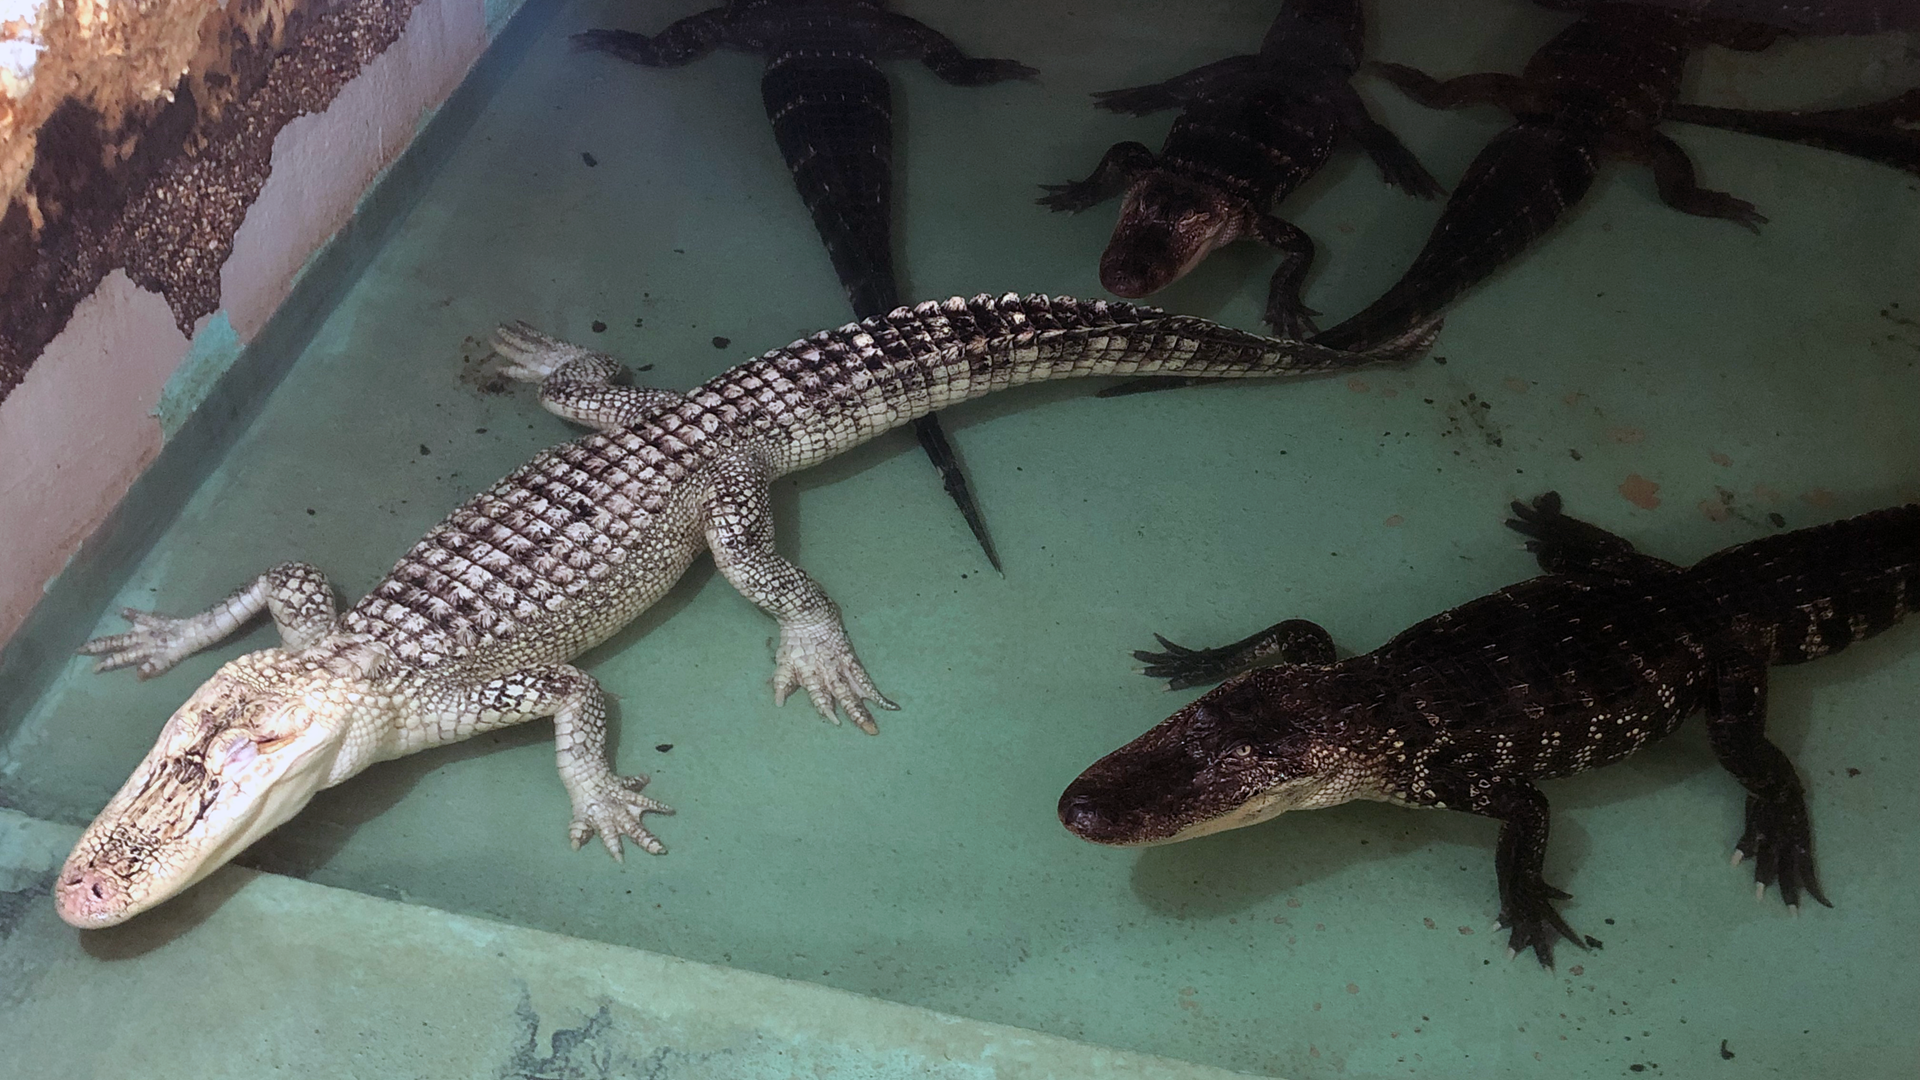 Insta-Gator Ranch & Hatchery in Covington is home to more than 2,000 alligators and more than 25,000 people tour the ranch each year. But it's not just about seeing the gators up close and personal or buying an alligator wallet.